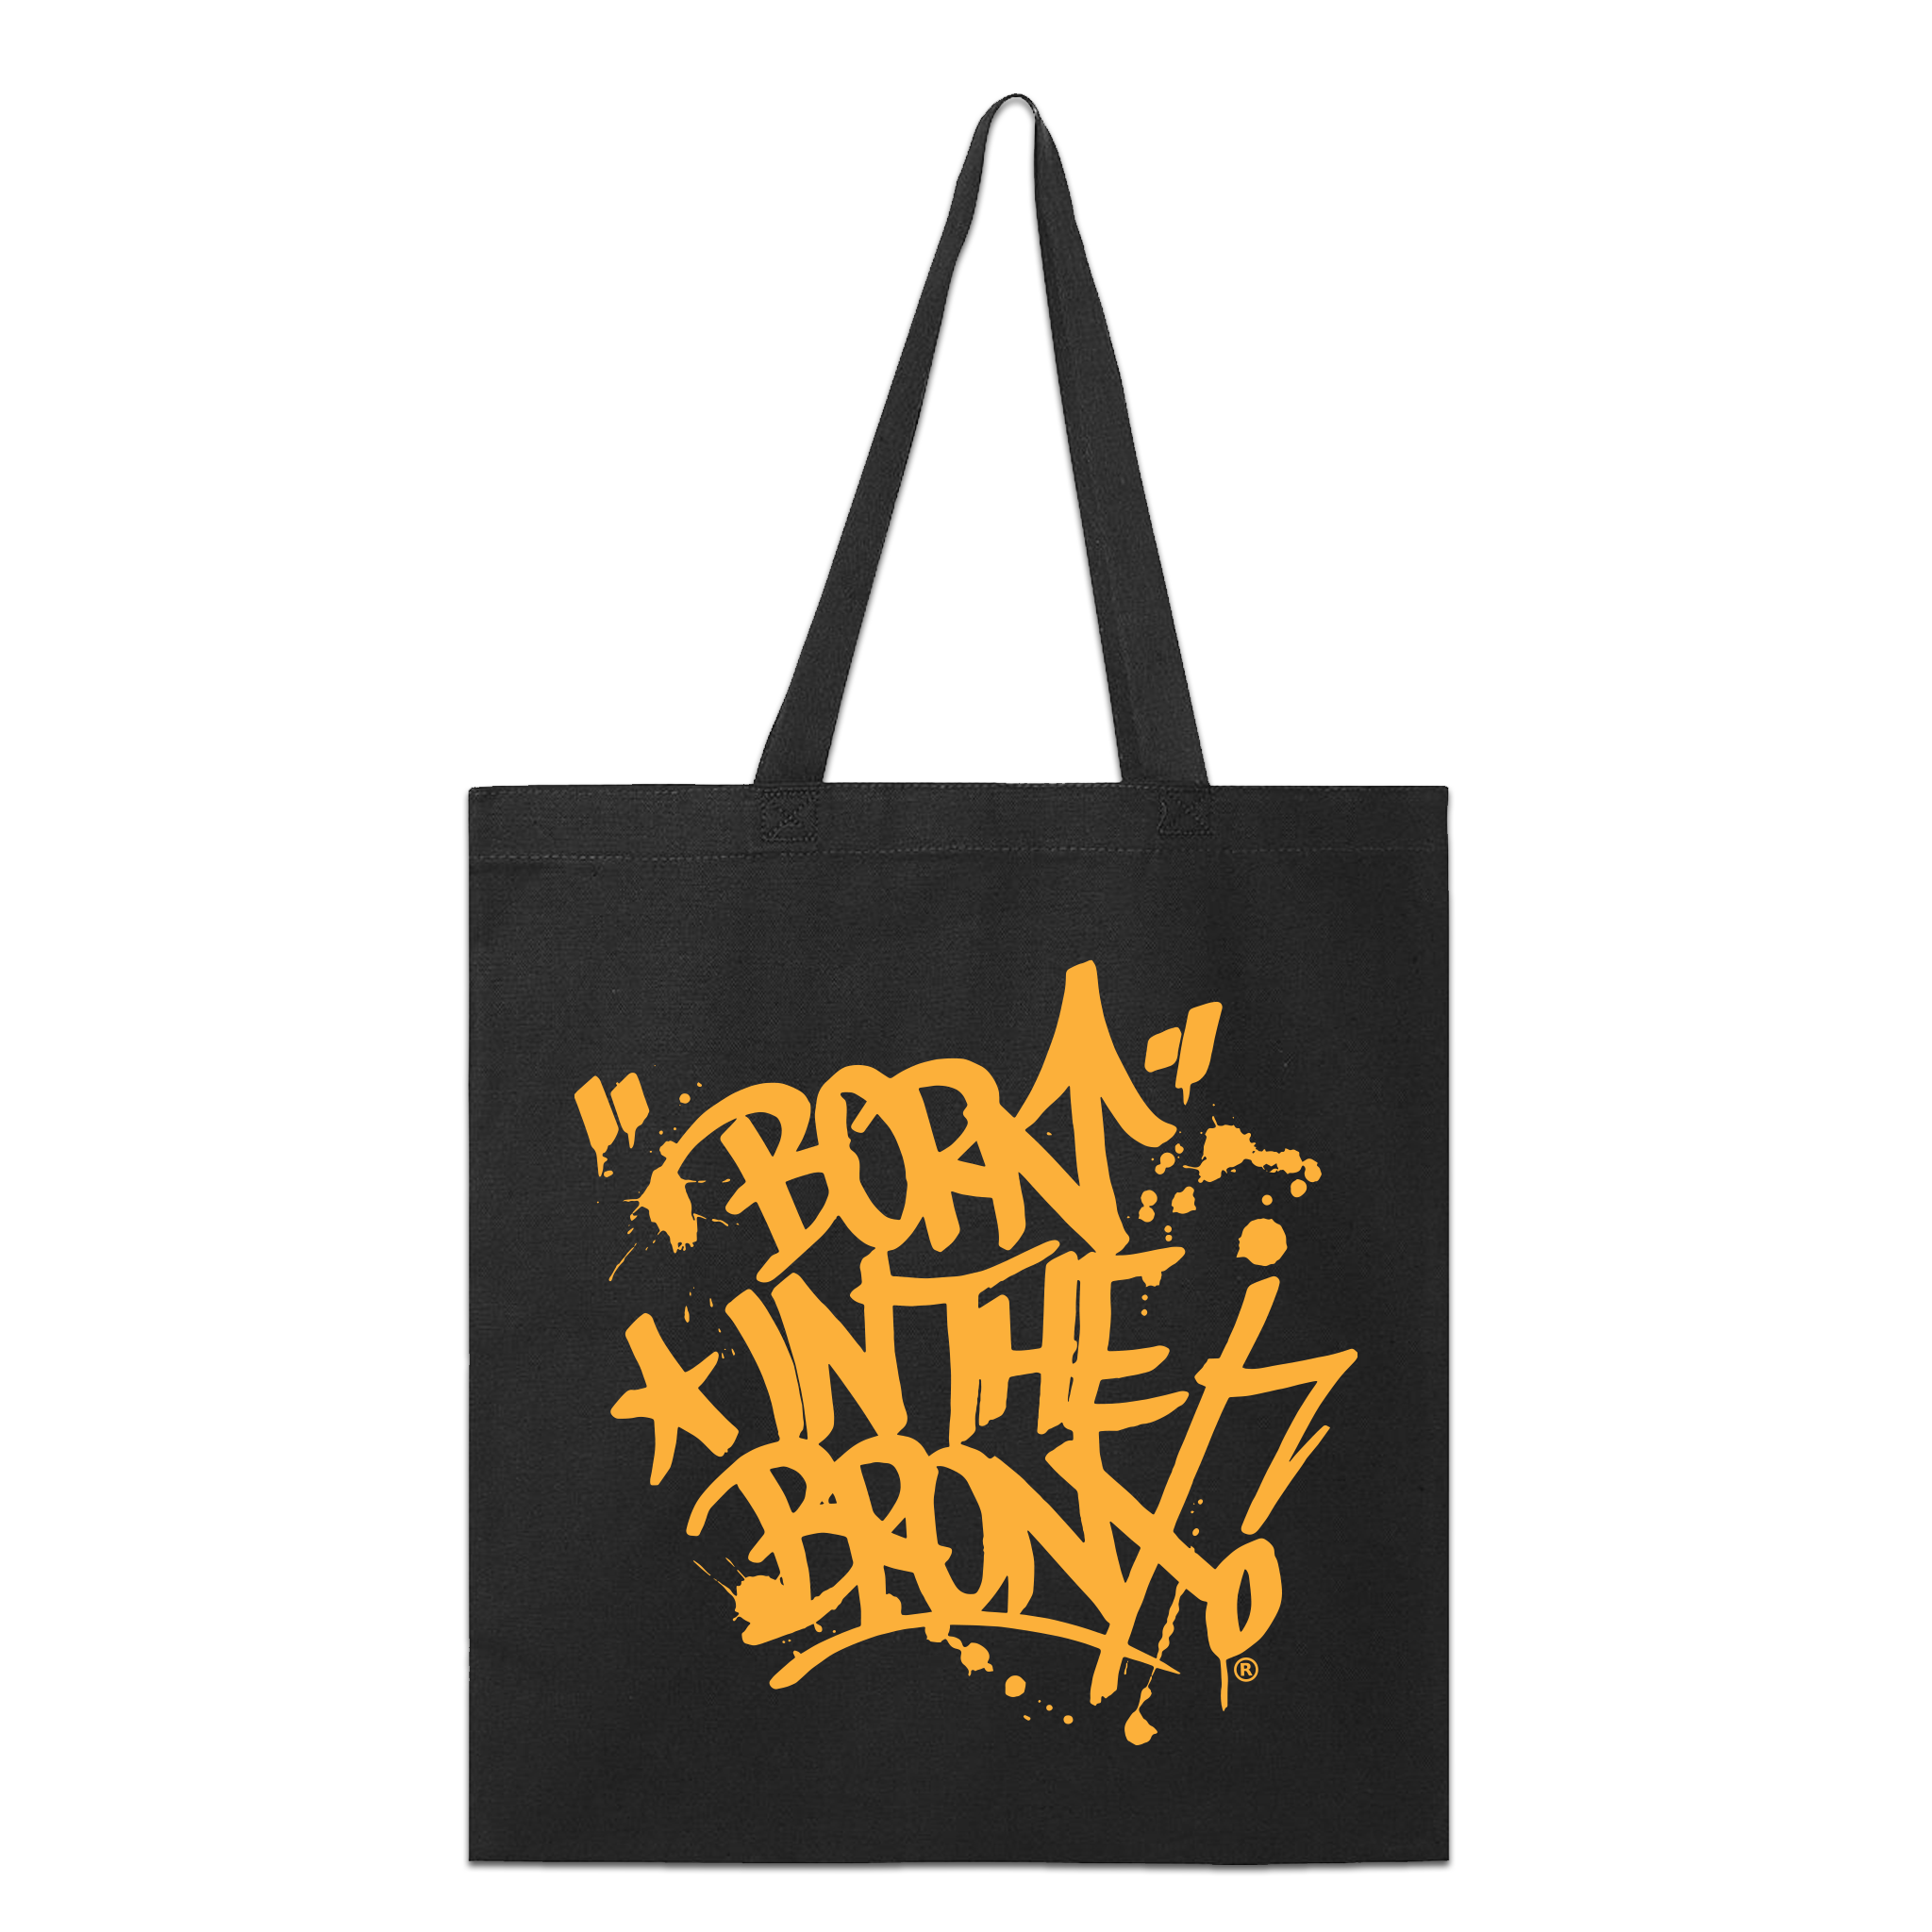 "Born" in The Bronx! Paint Splatter Tote Front in Gold on Black 